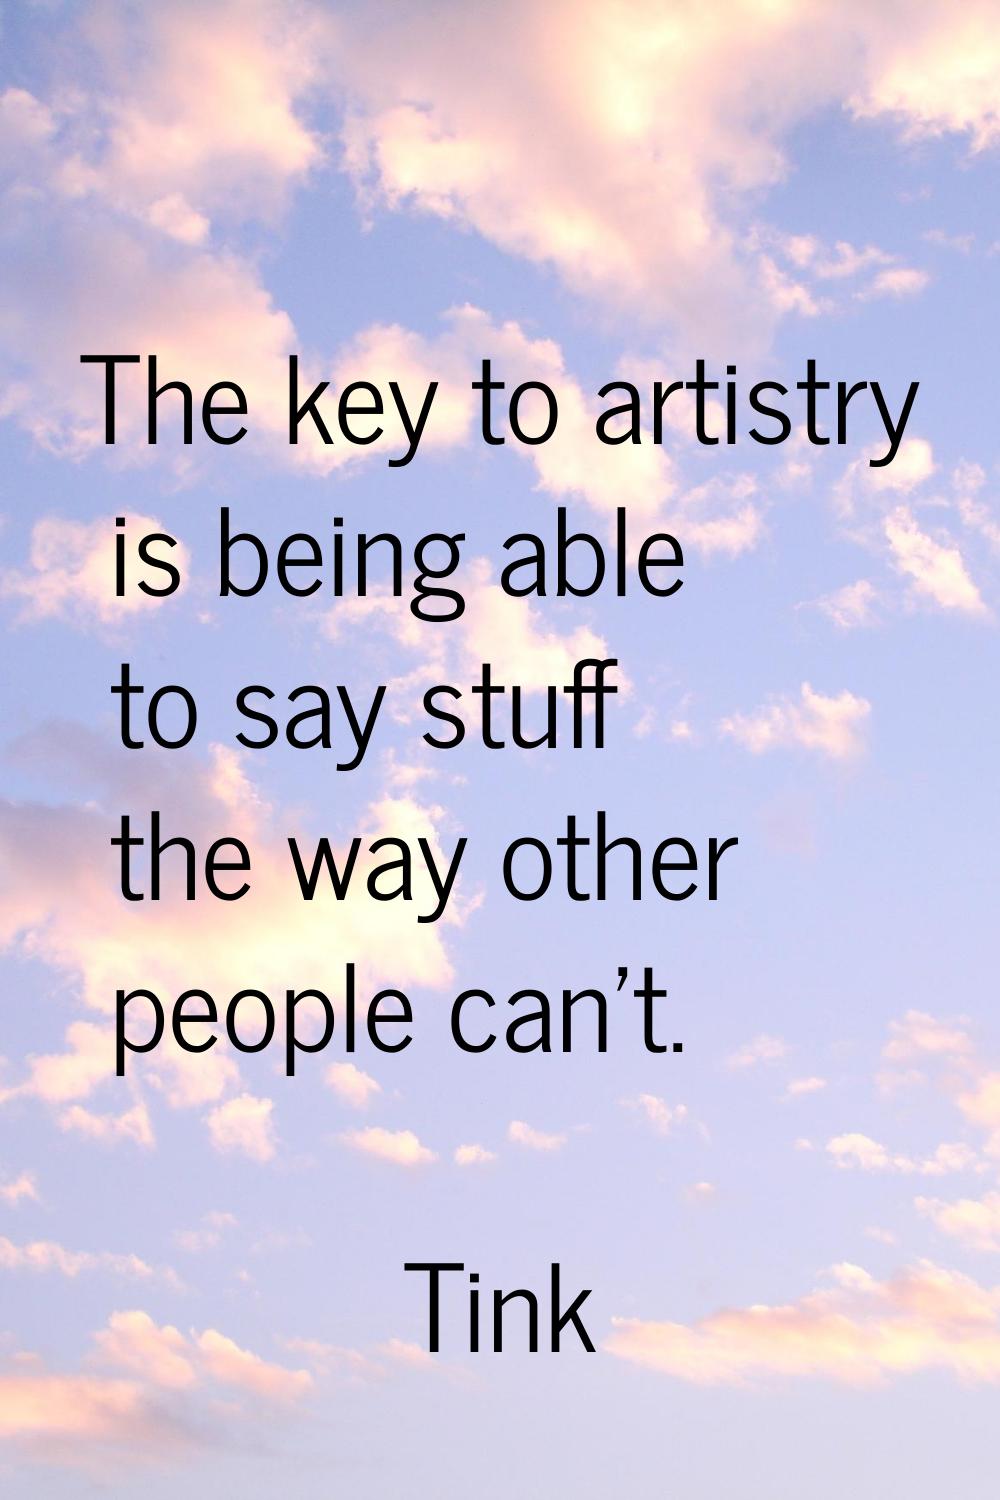 The key to artistry is being able to say stuff the way other people can't.